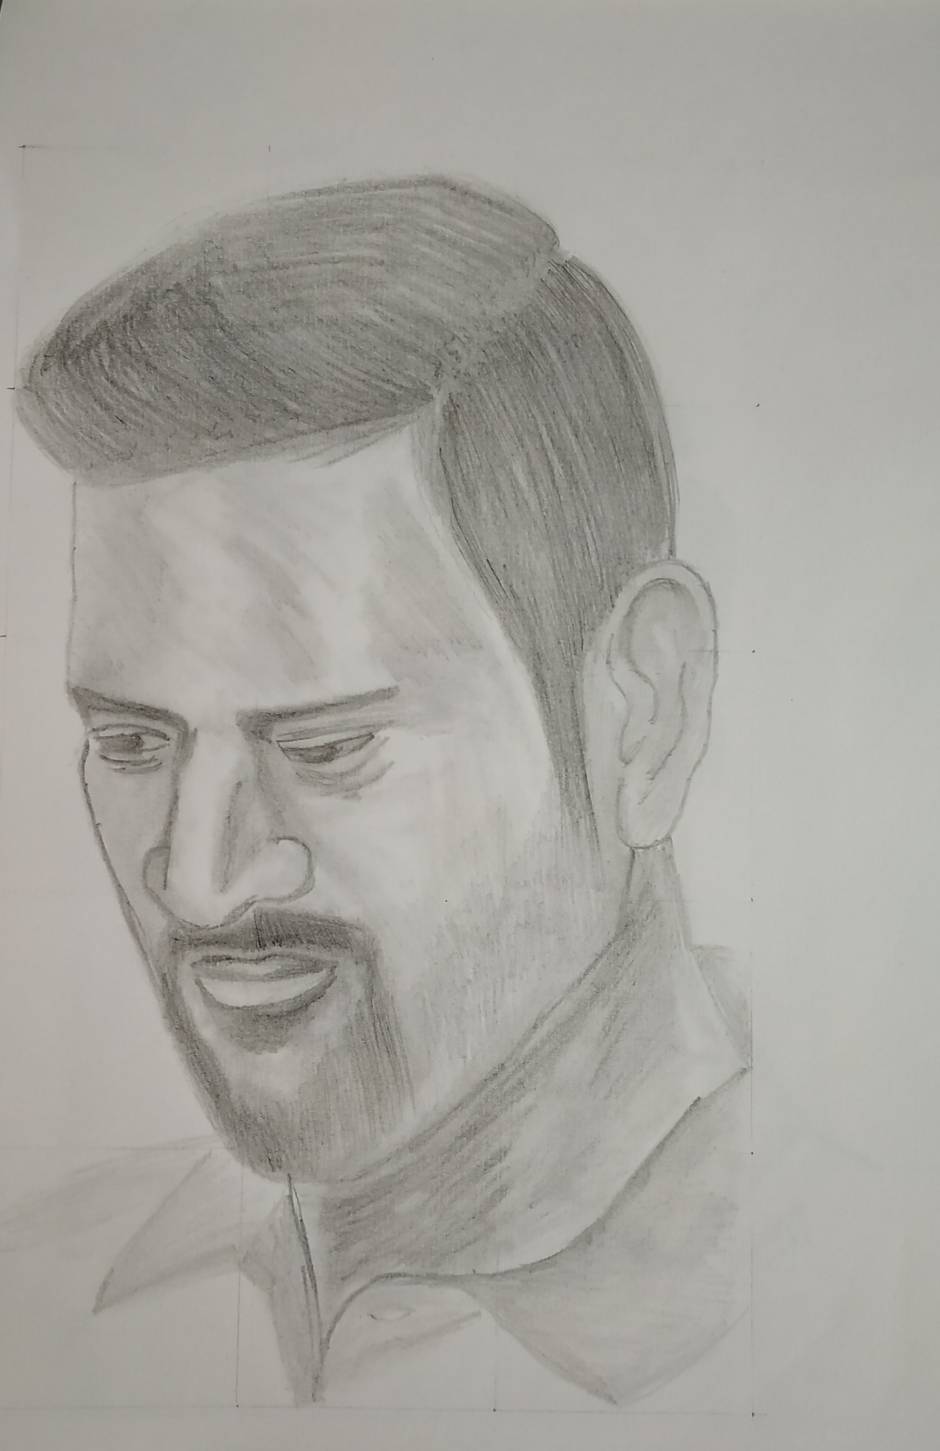 MS dhoni Drawing  MS Dhoni sketch step by step  portrait drawing  Sanju  Arts  YouTube